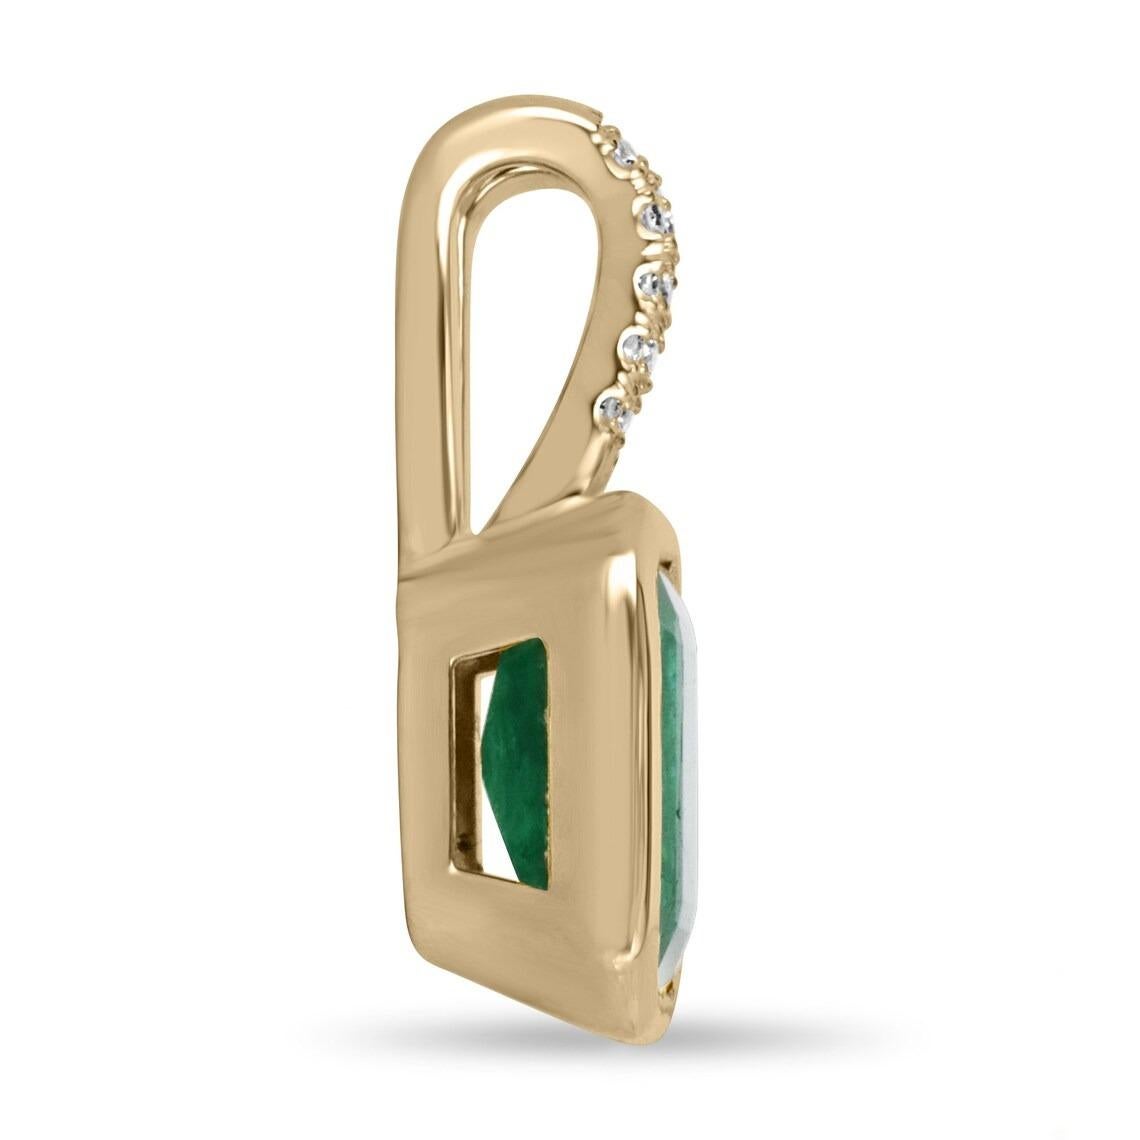 A ravishing bezel set emerald and diamond accent pendant. The center of attention consists of 3.12-carats of pure emerald goodness. The gemstone displays a remarkable vivid forest dark green color, with very good clarity and luster. Surface-reaching